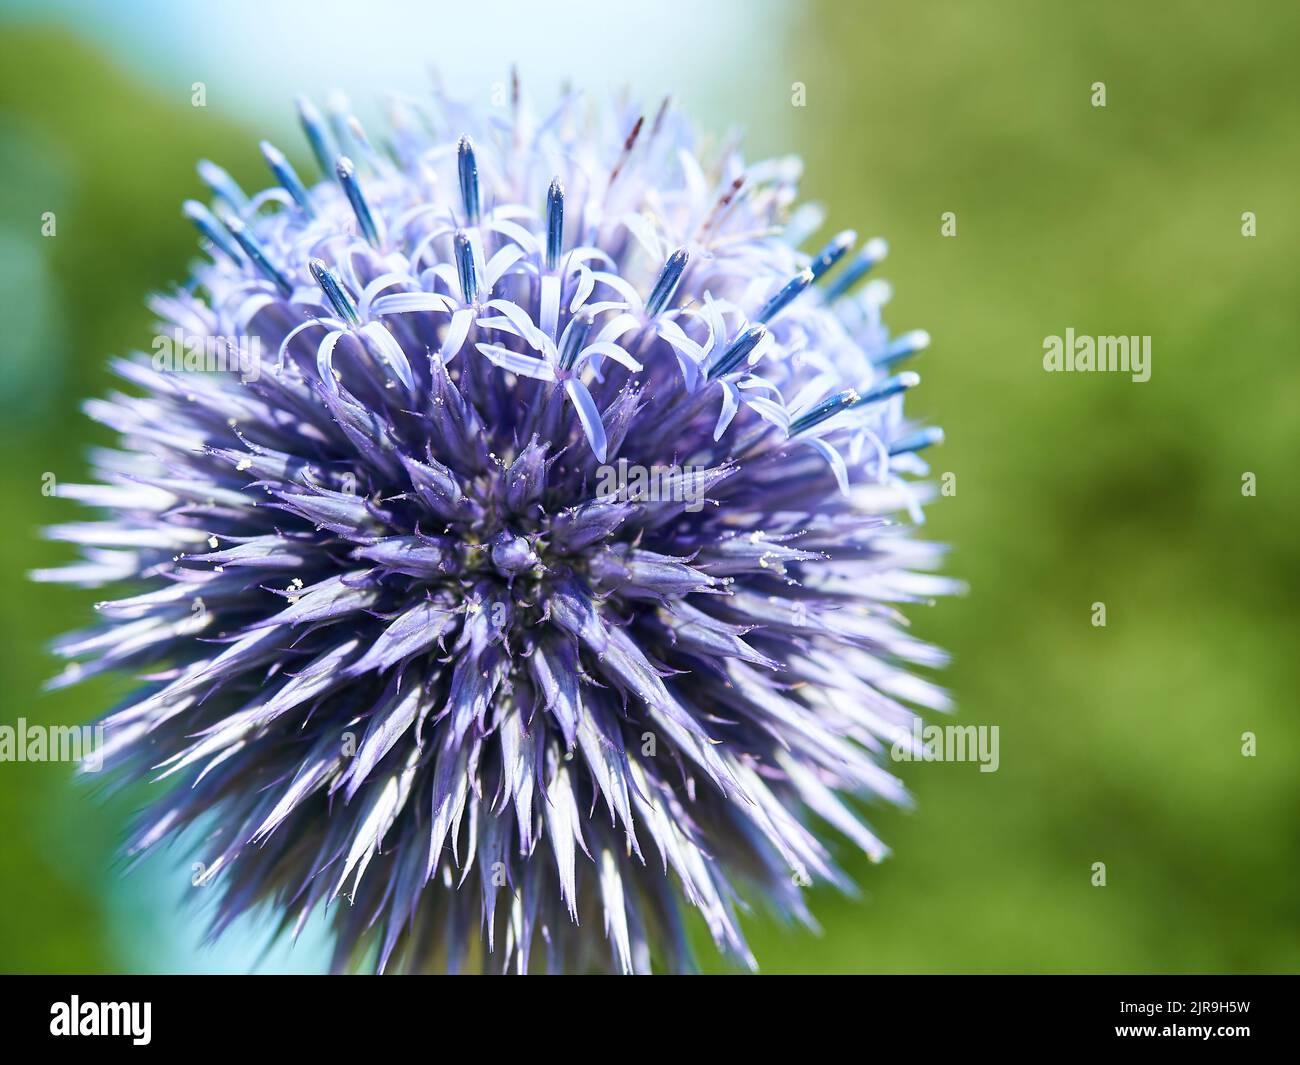 Close-up of the intricate, jagged structure of a globe thistle in bright sunlight, rich purple set off by the de-focused green background. Stock Photo